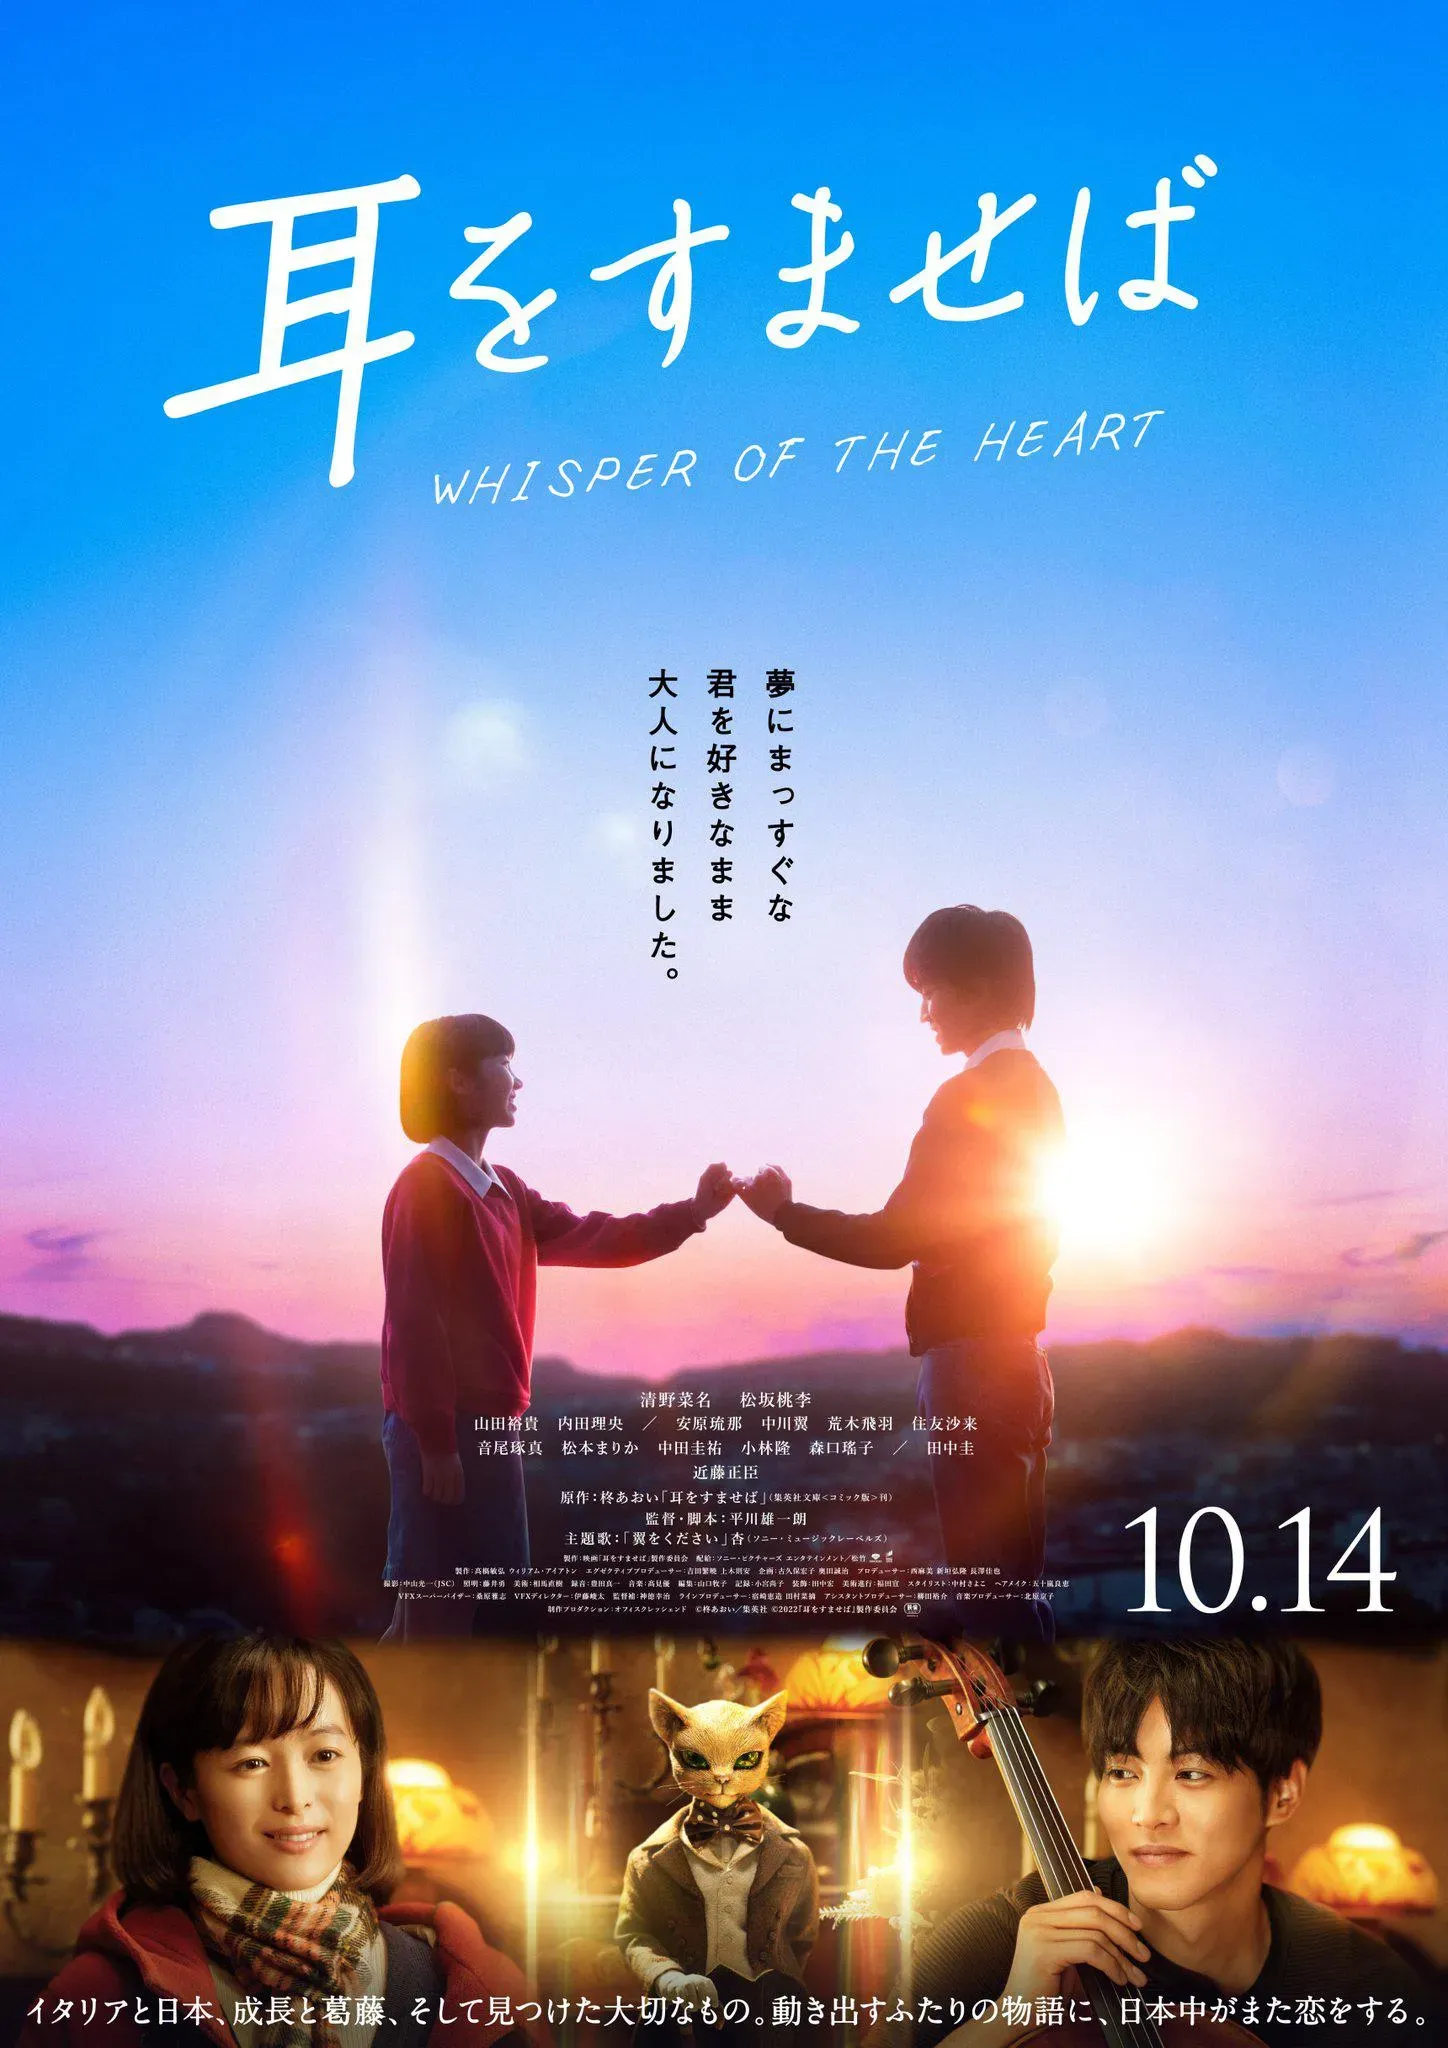 Live-Action Movie "Whisper of the Heart" Releases New Poster | FMV6